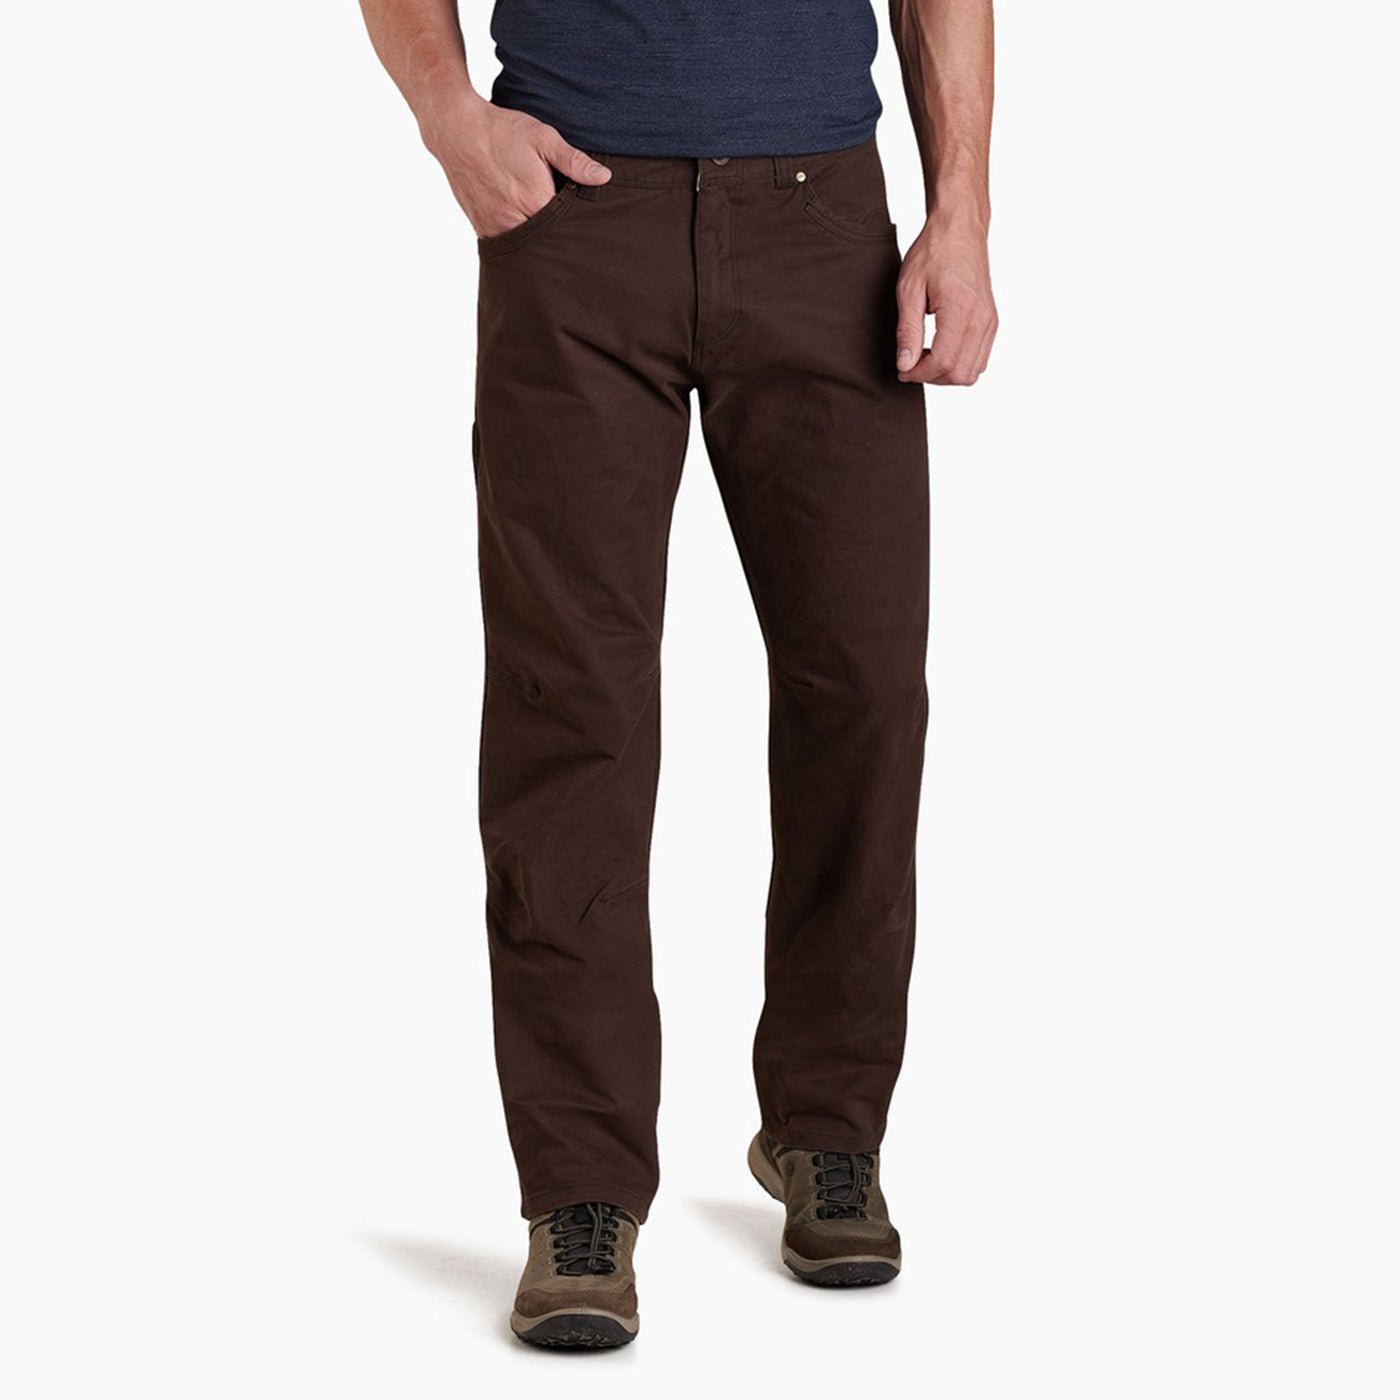 kuhl rydr pant mens on model front view in color brown 